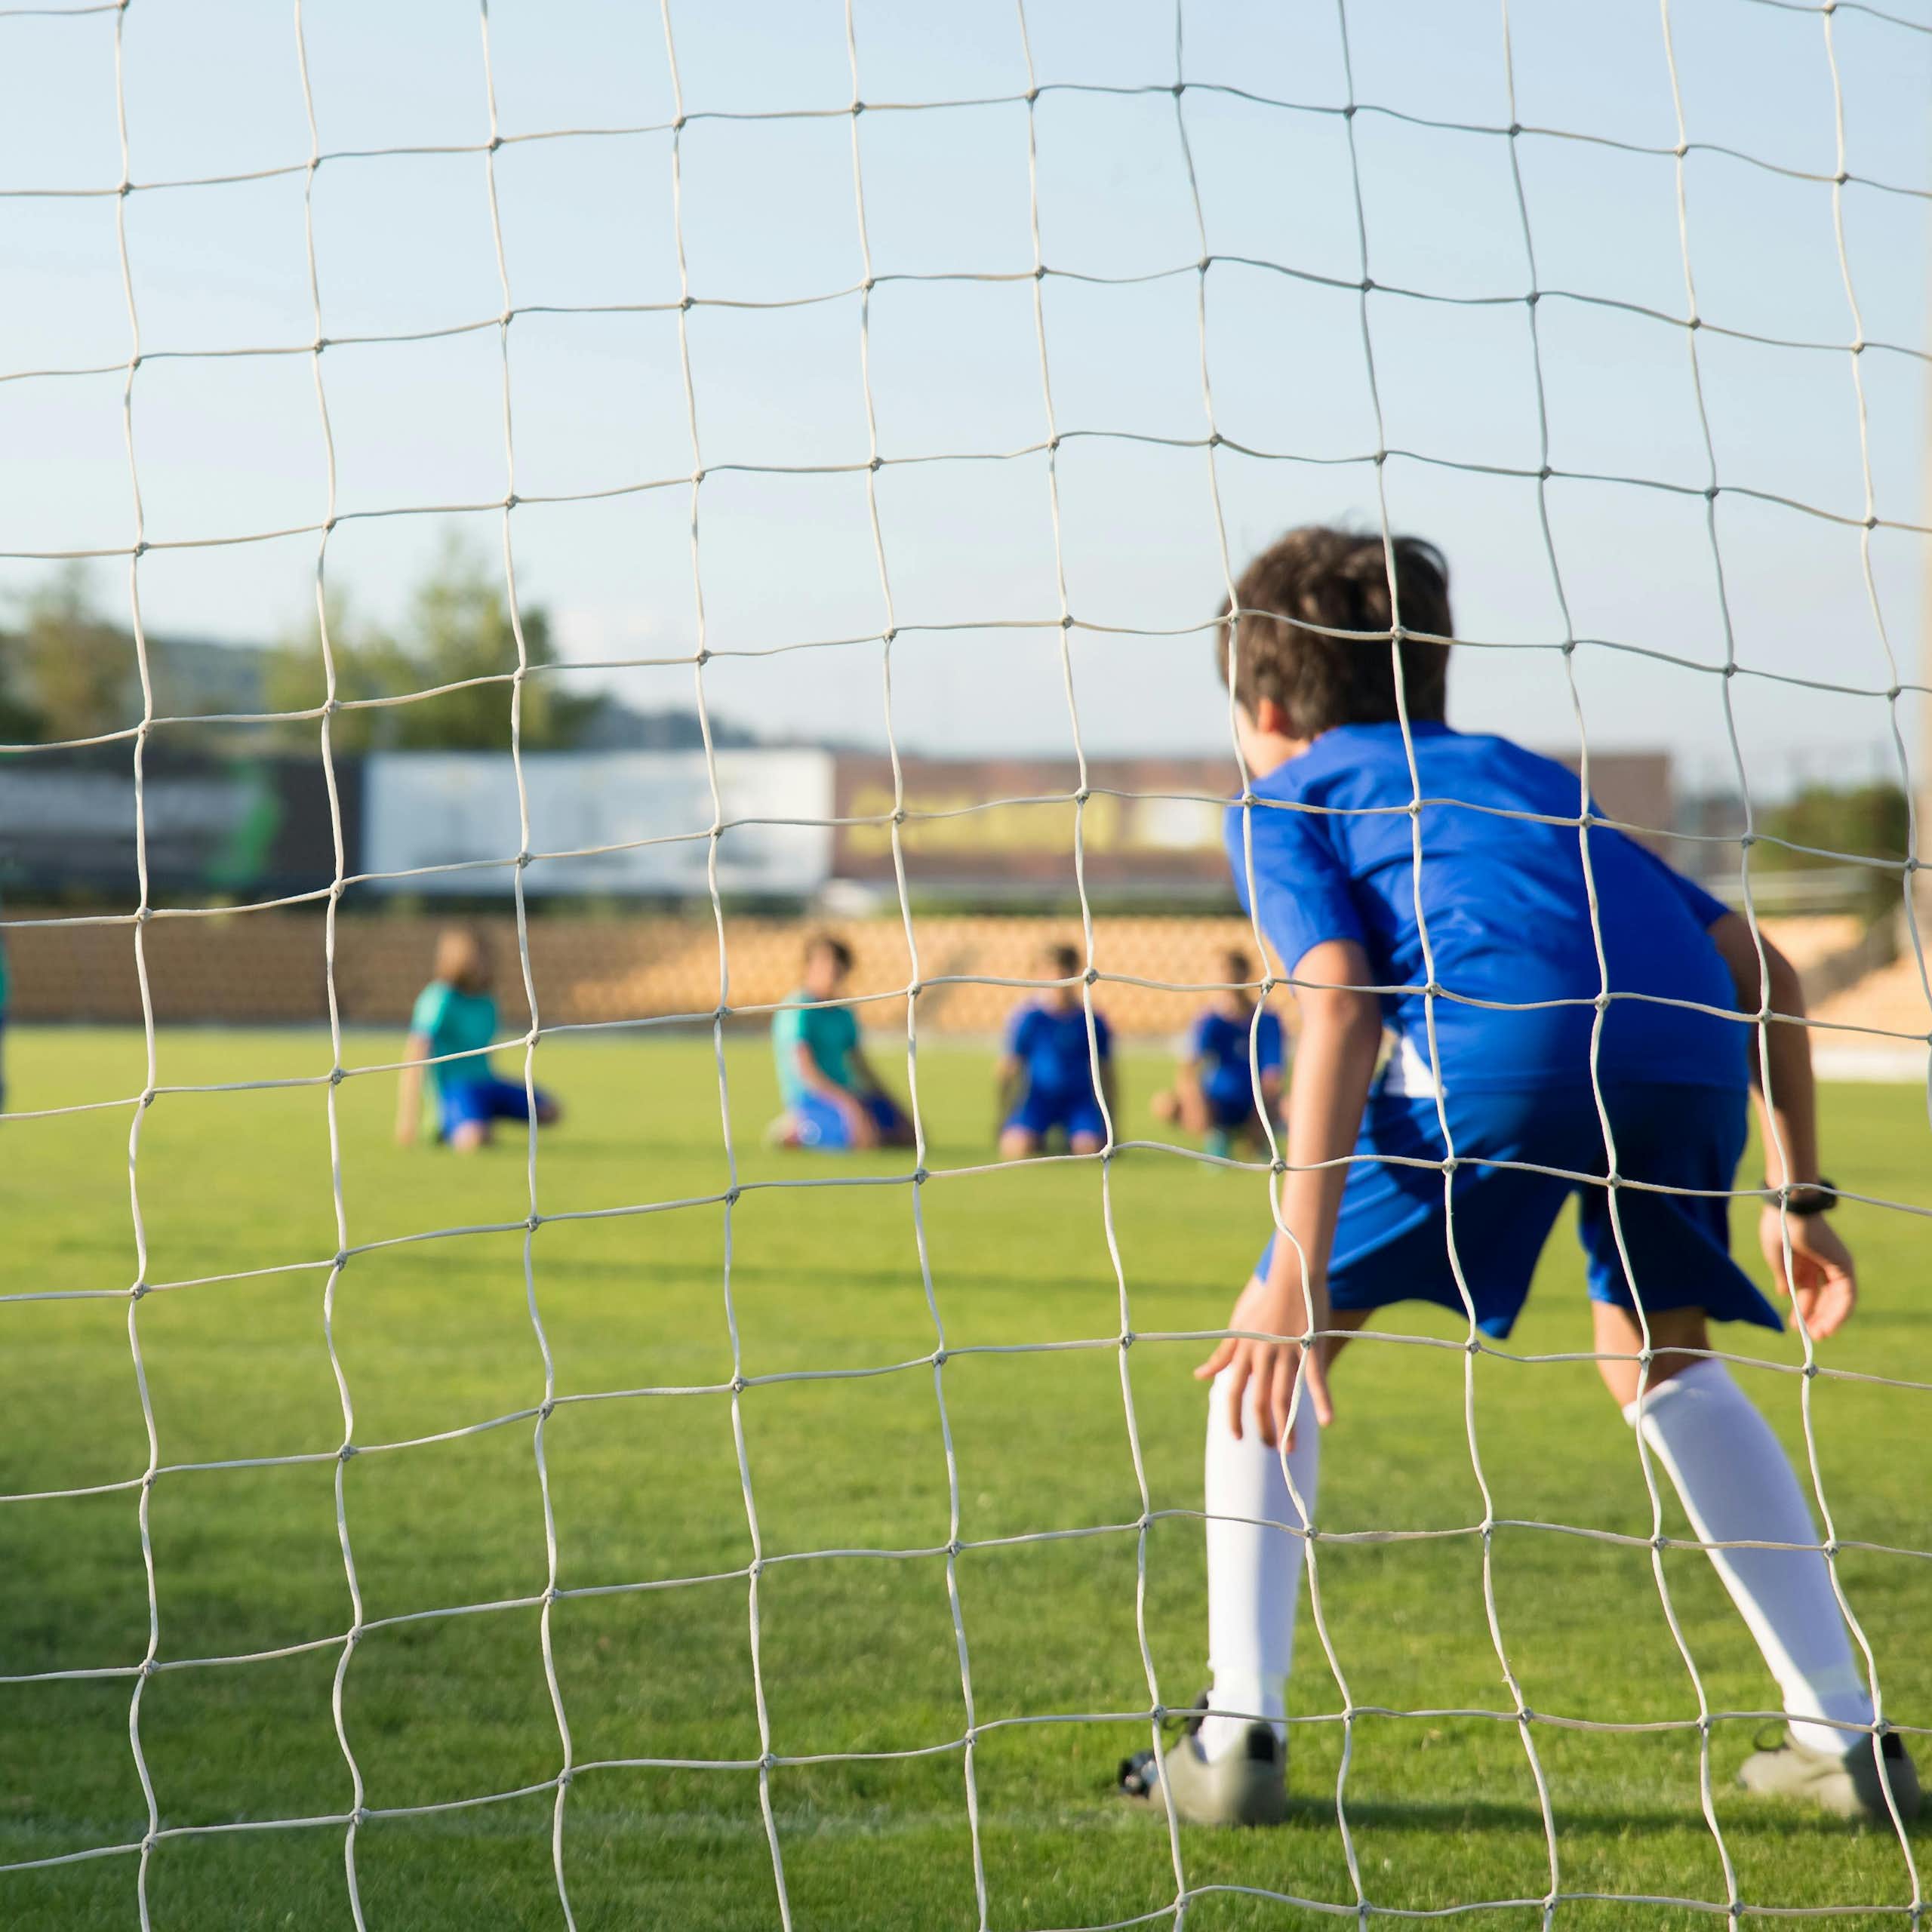 A boy prepares to kick a ball into a soccer net. Another boy waits to stop it. 